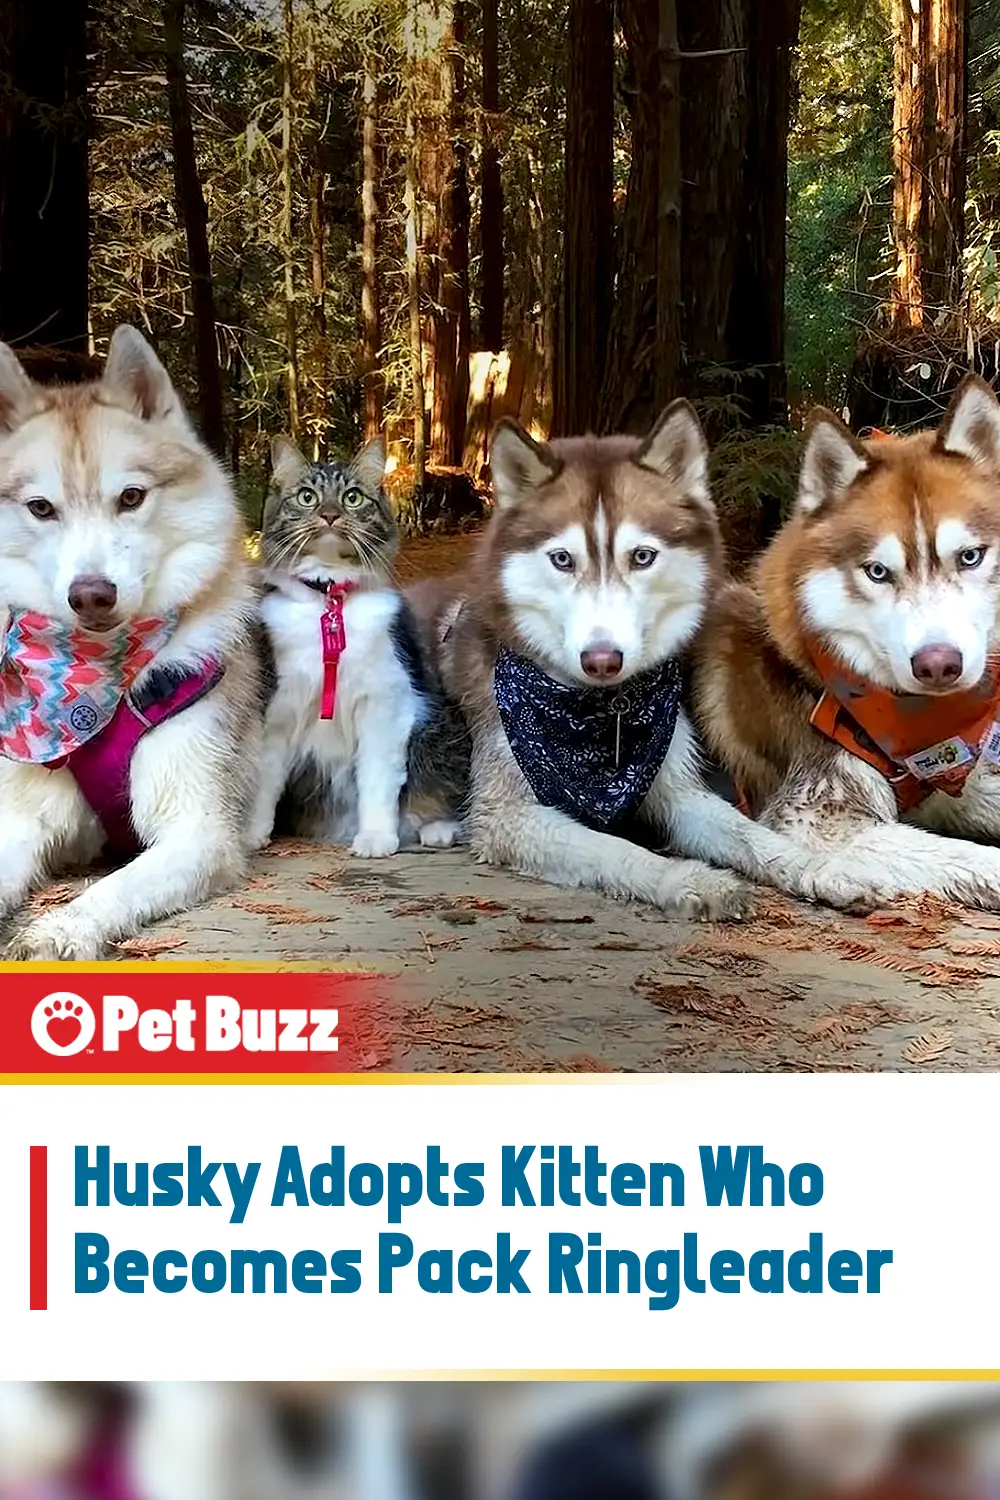 Husky Adopts Kitten Who Becomes Pack Ringleader